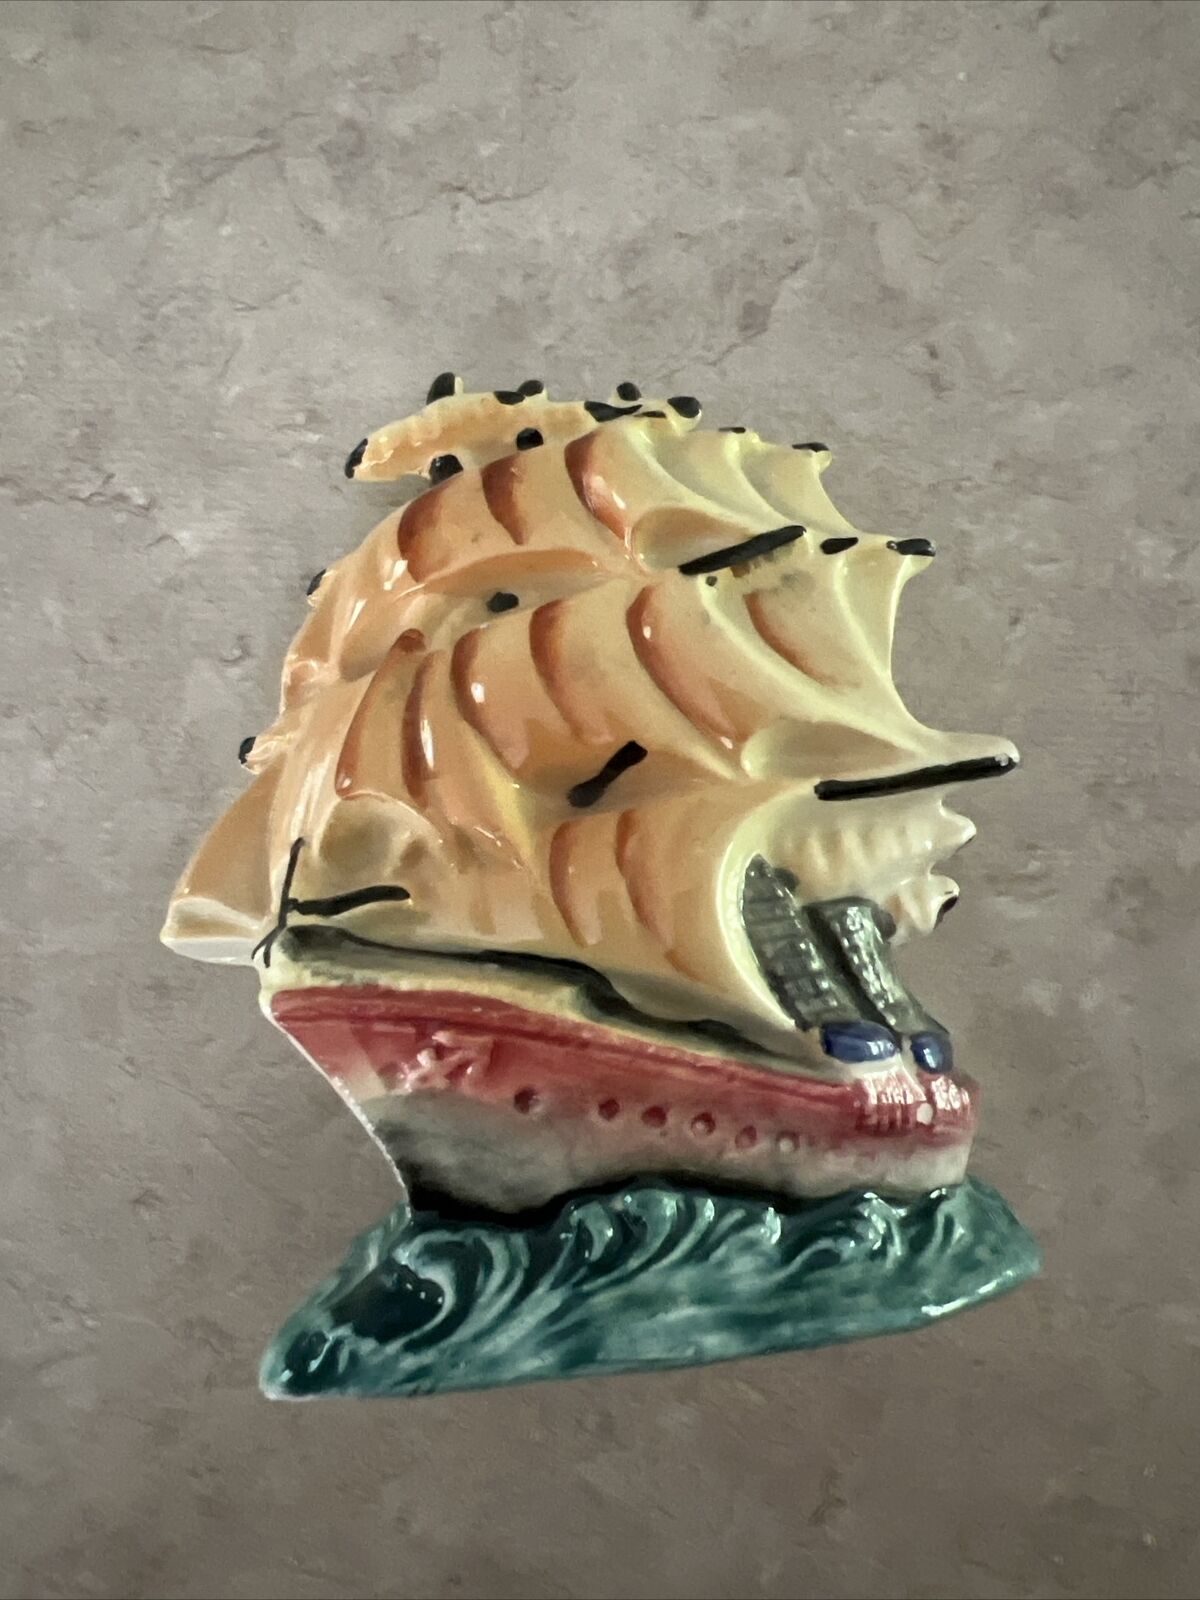 Vintage Sailing Ship Ceramic Figurine 4.5” Tall 4” Wide Made In Japan